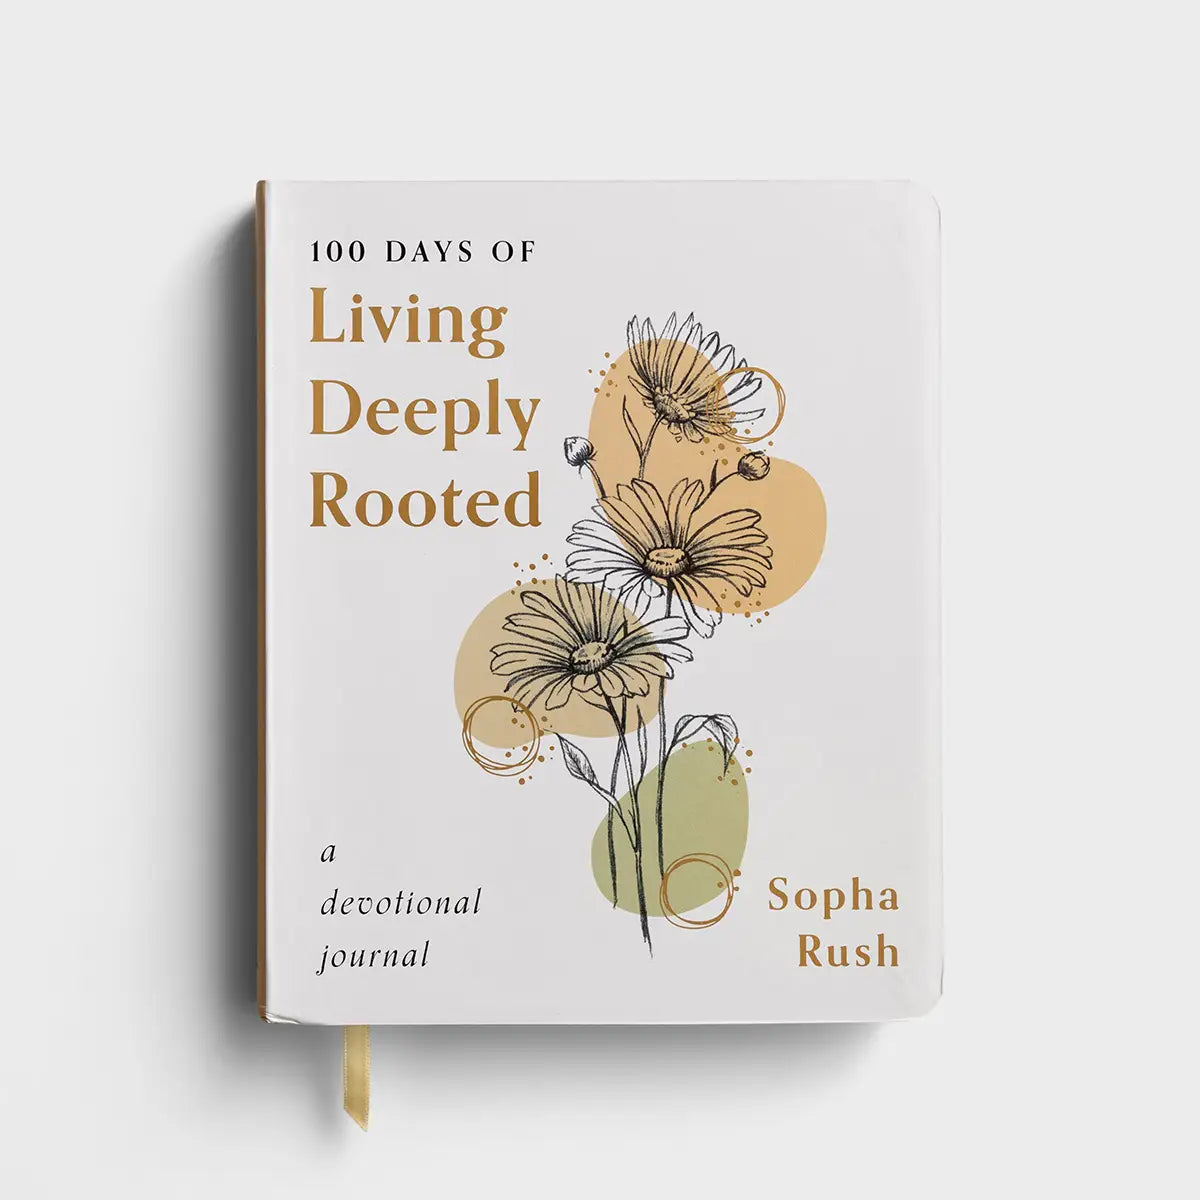 Sopha Rush - 100 Days of Living Deeply Rooted - Devotional Journal